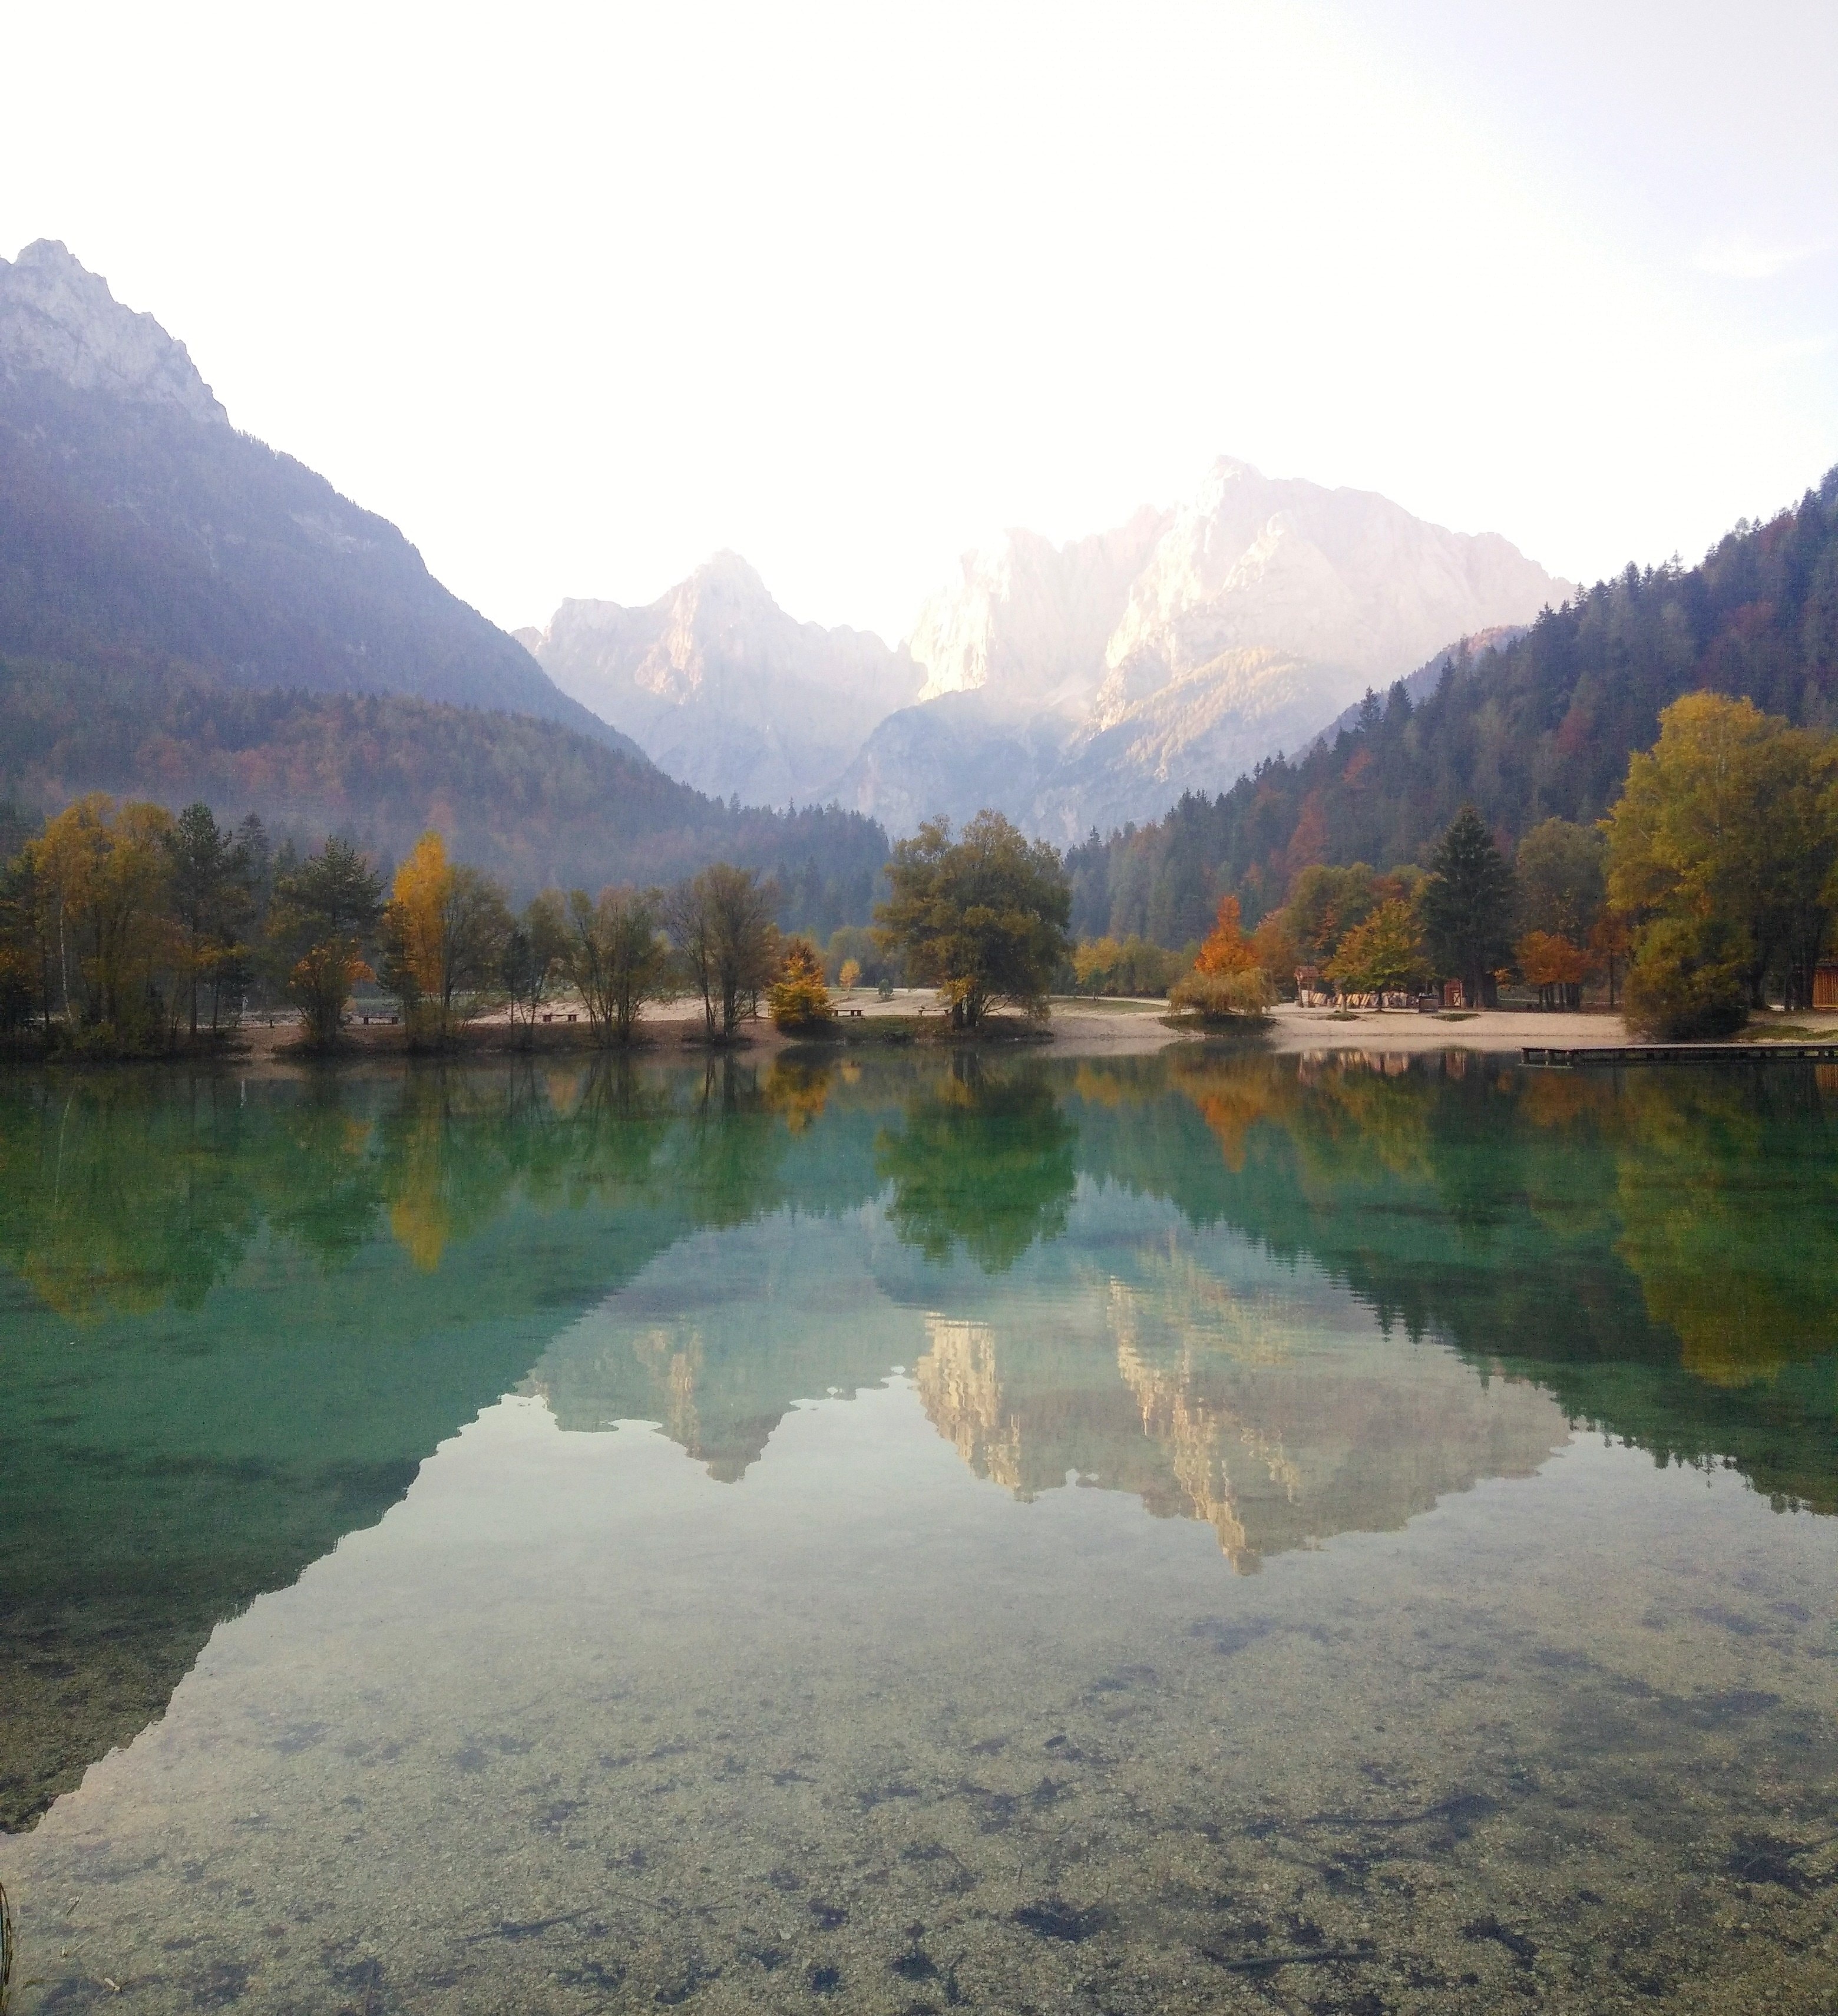 The reflection of Julian Alps on the surface of Lake Jasna 

#GreatOutdoors